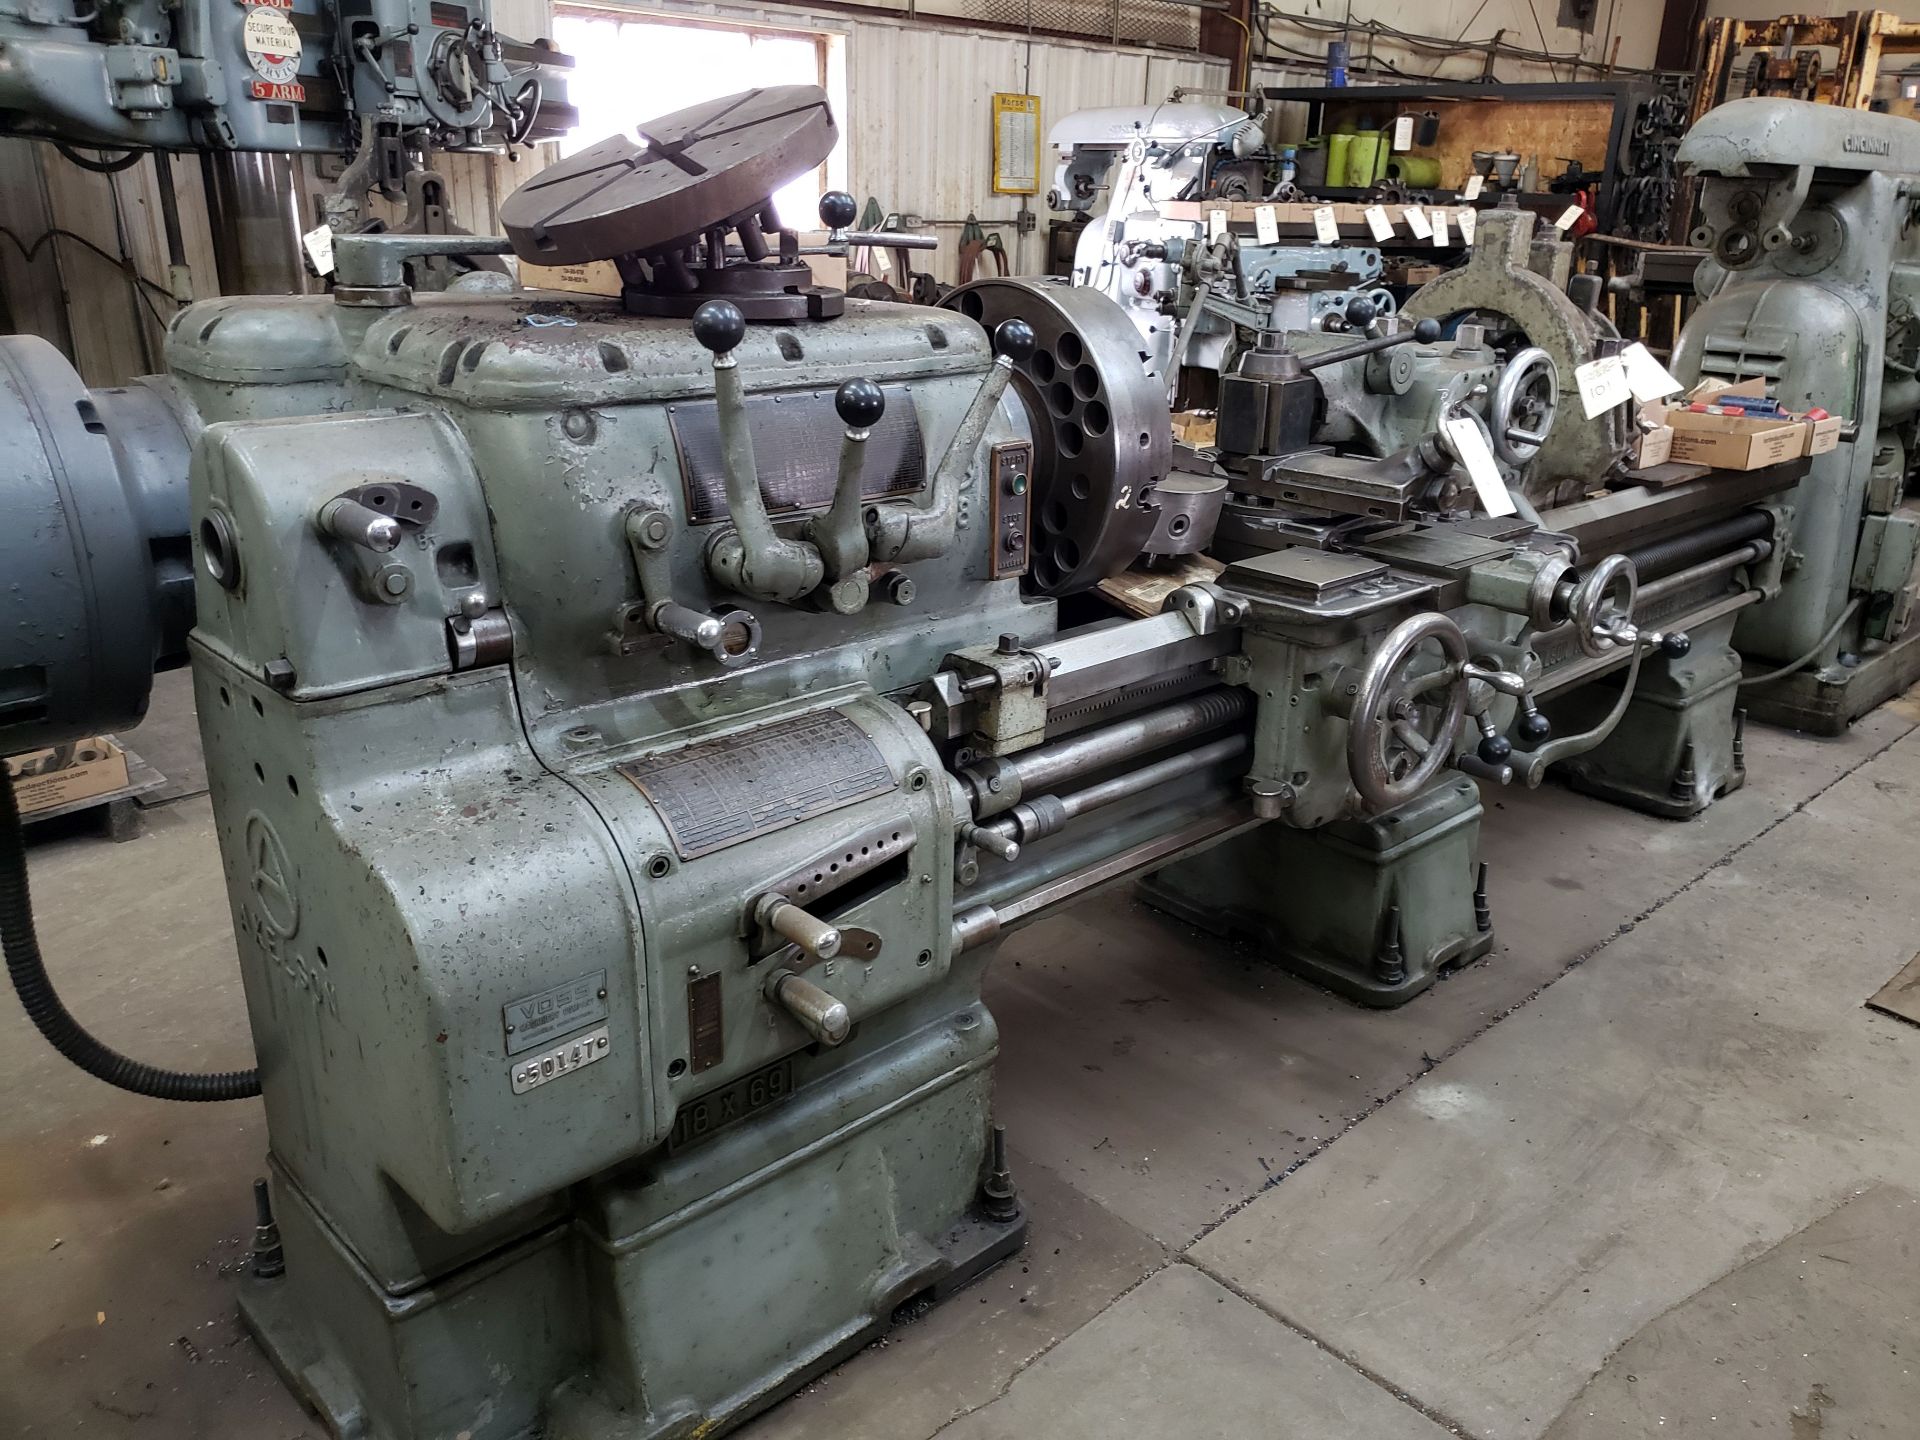 AXELSON 18"x69" LATHE 20.5" SWING, 10' BED LENGTH, 72" CENTERS, 8-808 RPM SPINDLE SPEED, SN 3233,